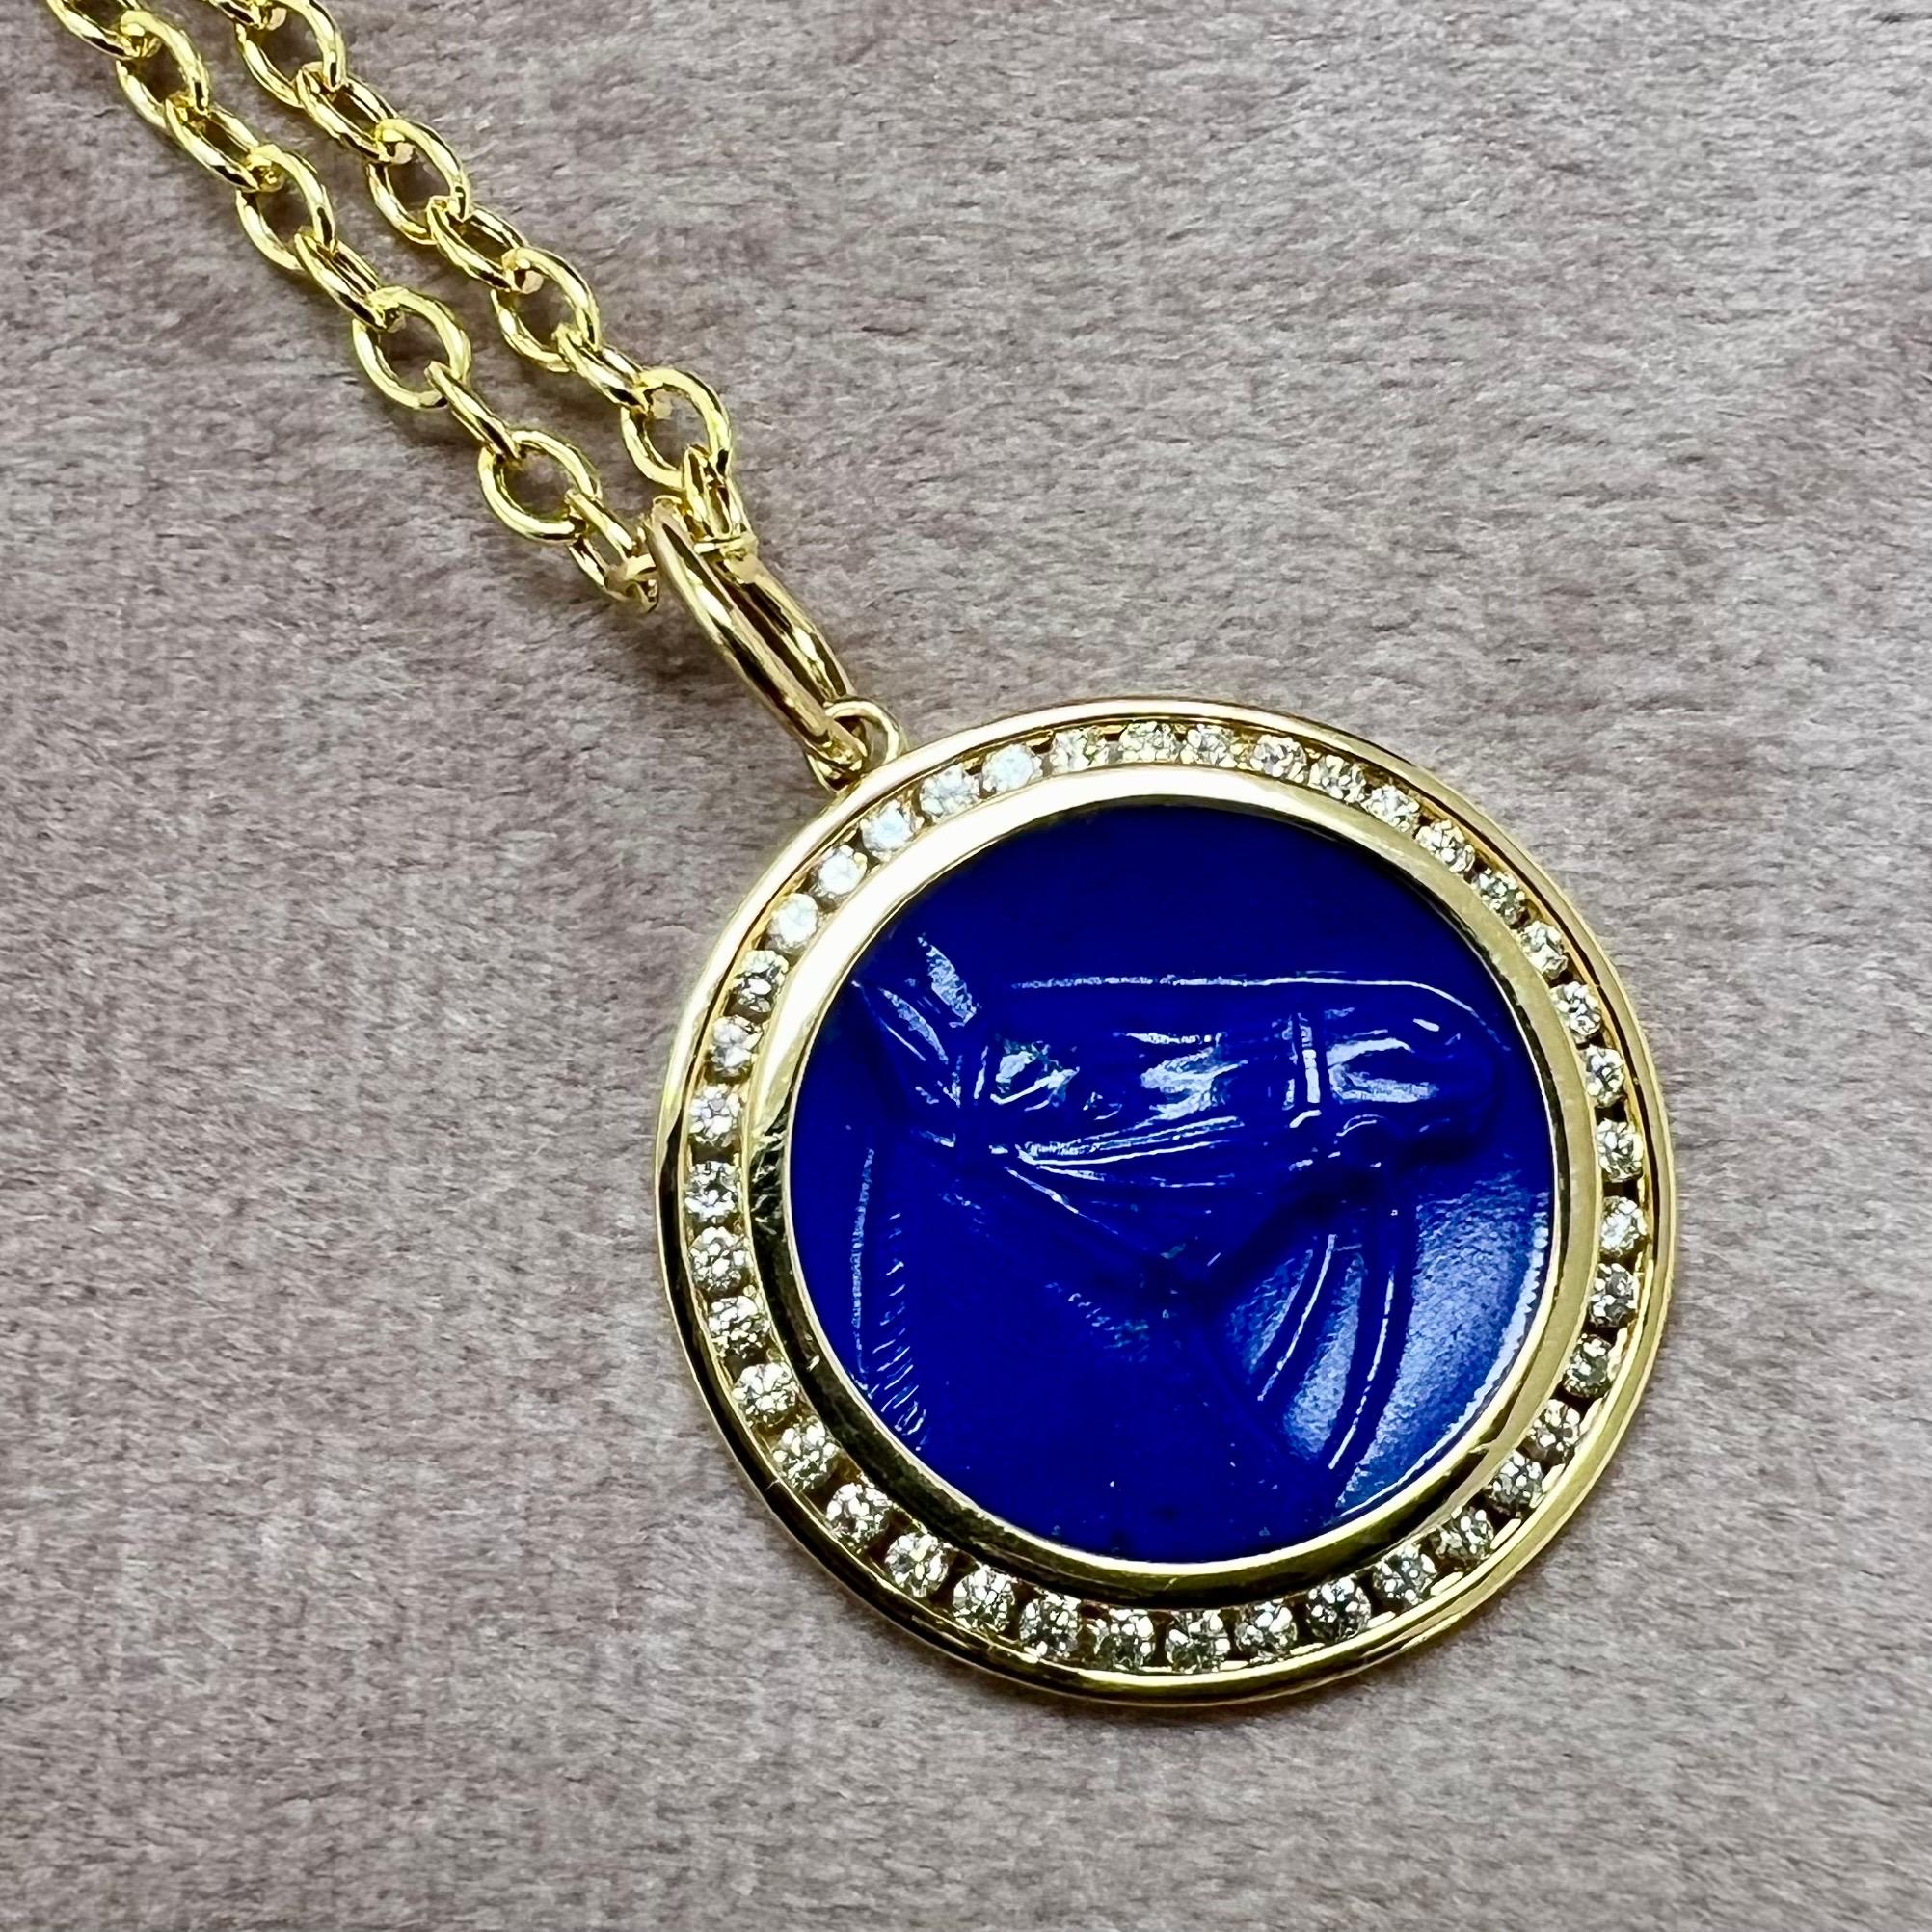 Created in 18 karat yellow gold
Lapis Lazuli 6 carats approx.
Diamonds 0.40 carat approx.
Chain sold separately 
Limited edition


About the Designers ~ Dharmesh & Namrata

Drawing inspiration from little things, Dharmesh & Namrata Kothari have